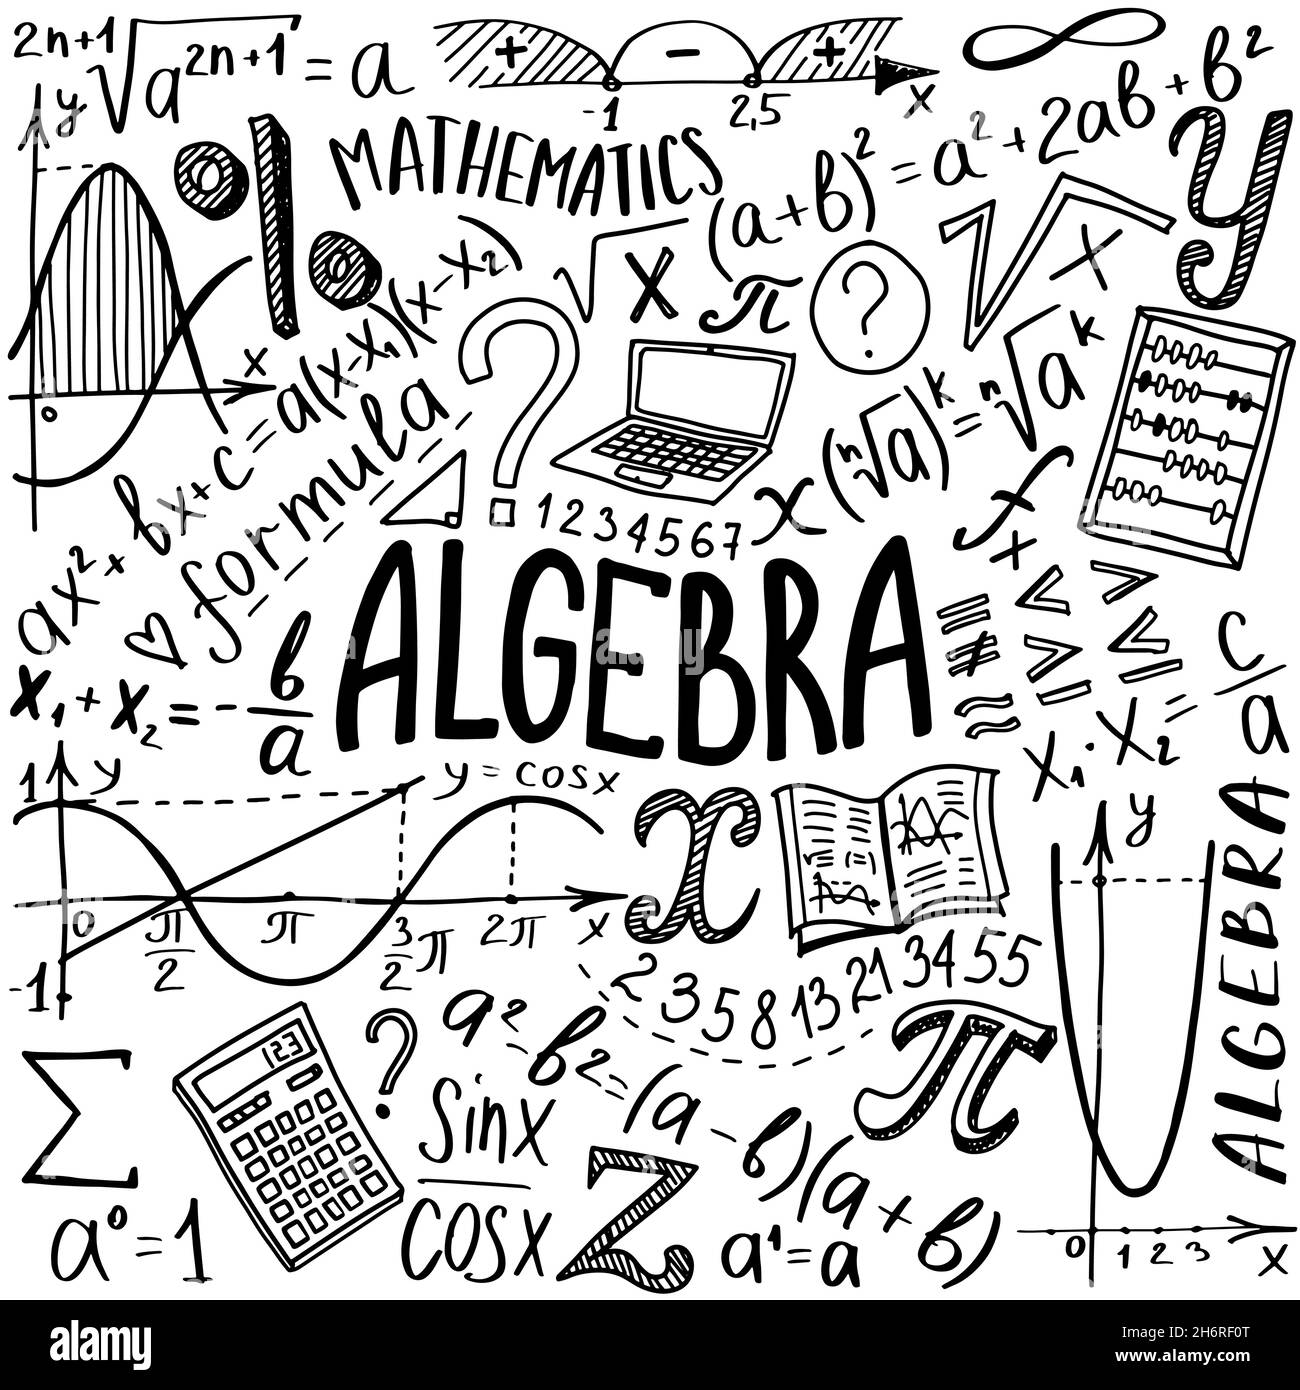 Maths symbols icon set. Algebra or mathematics subject doodle design. Education and study concept. Back to school background for notebook, not pad Stock Vector